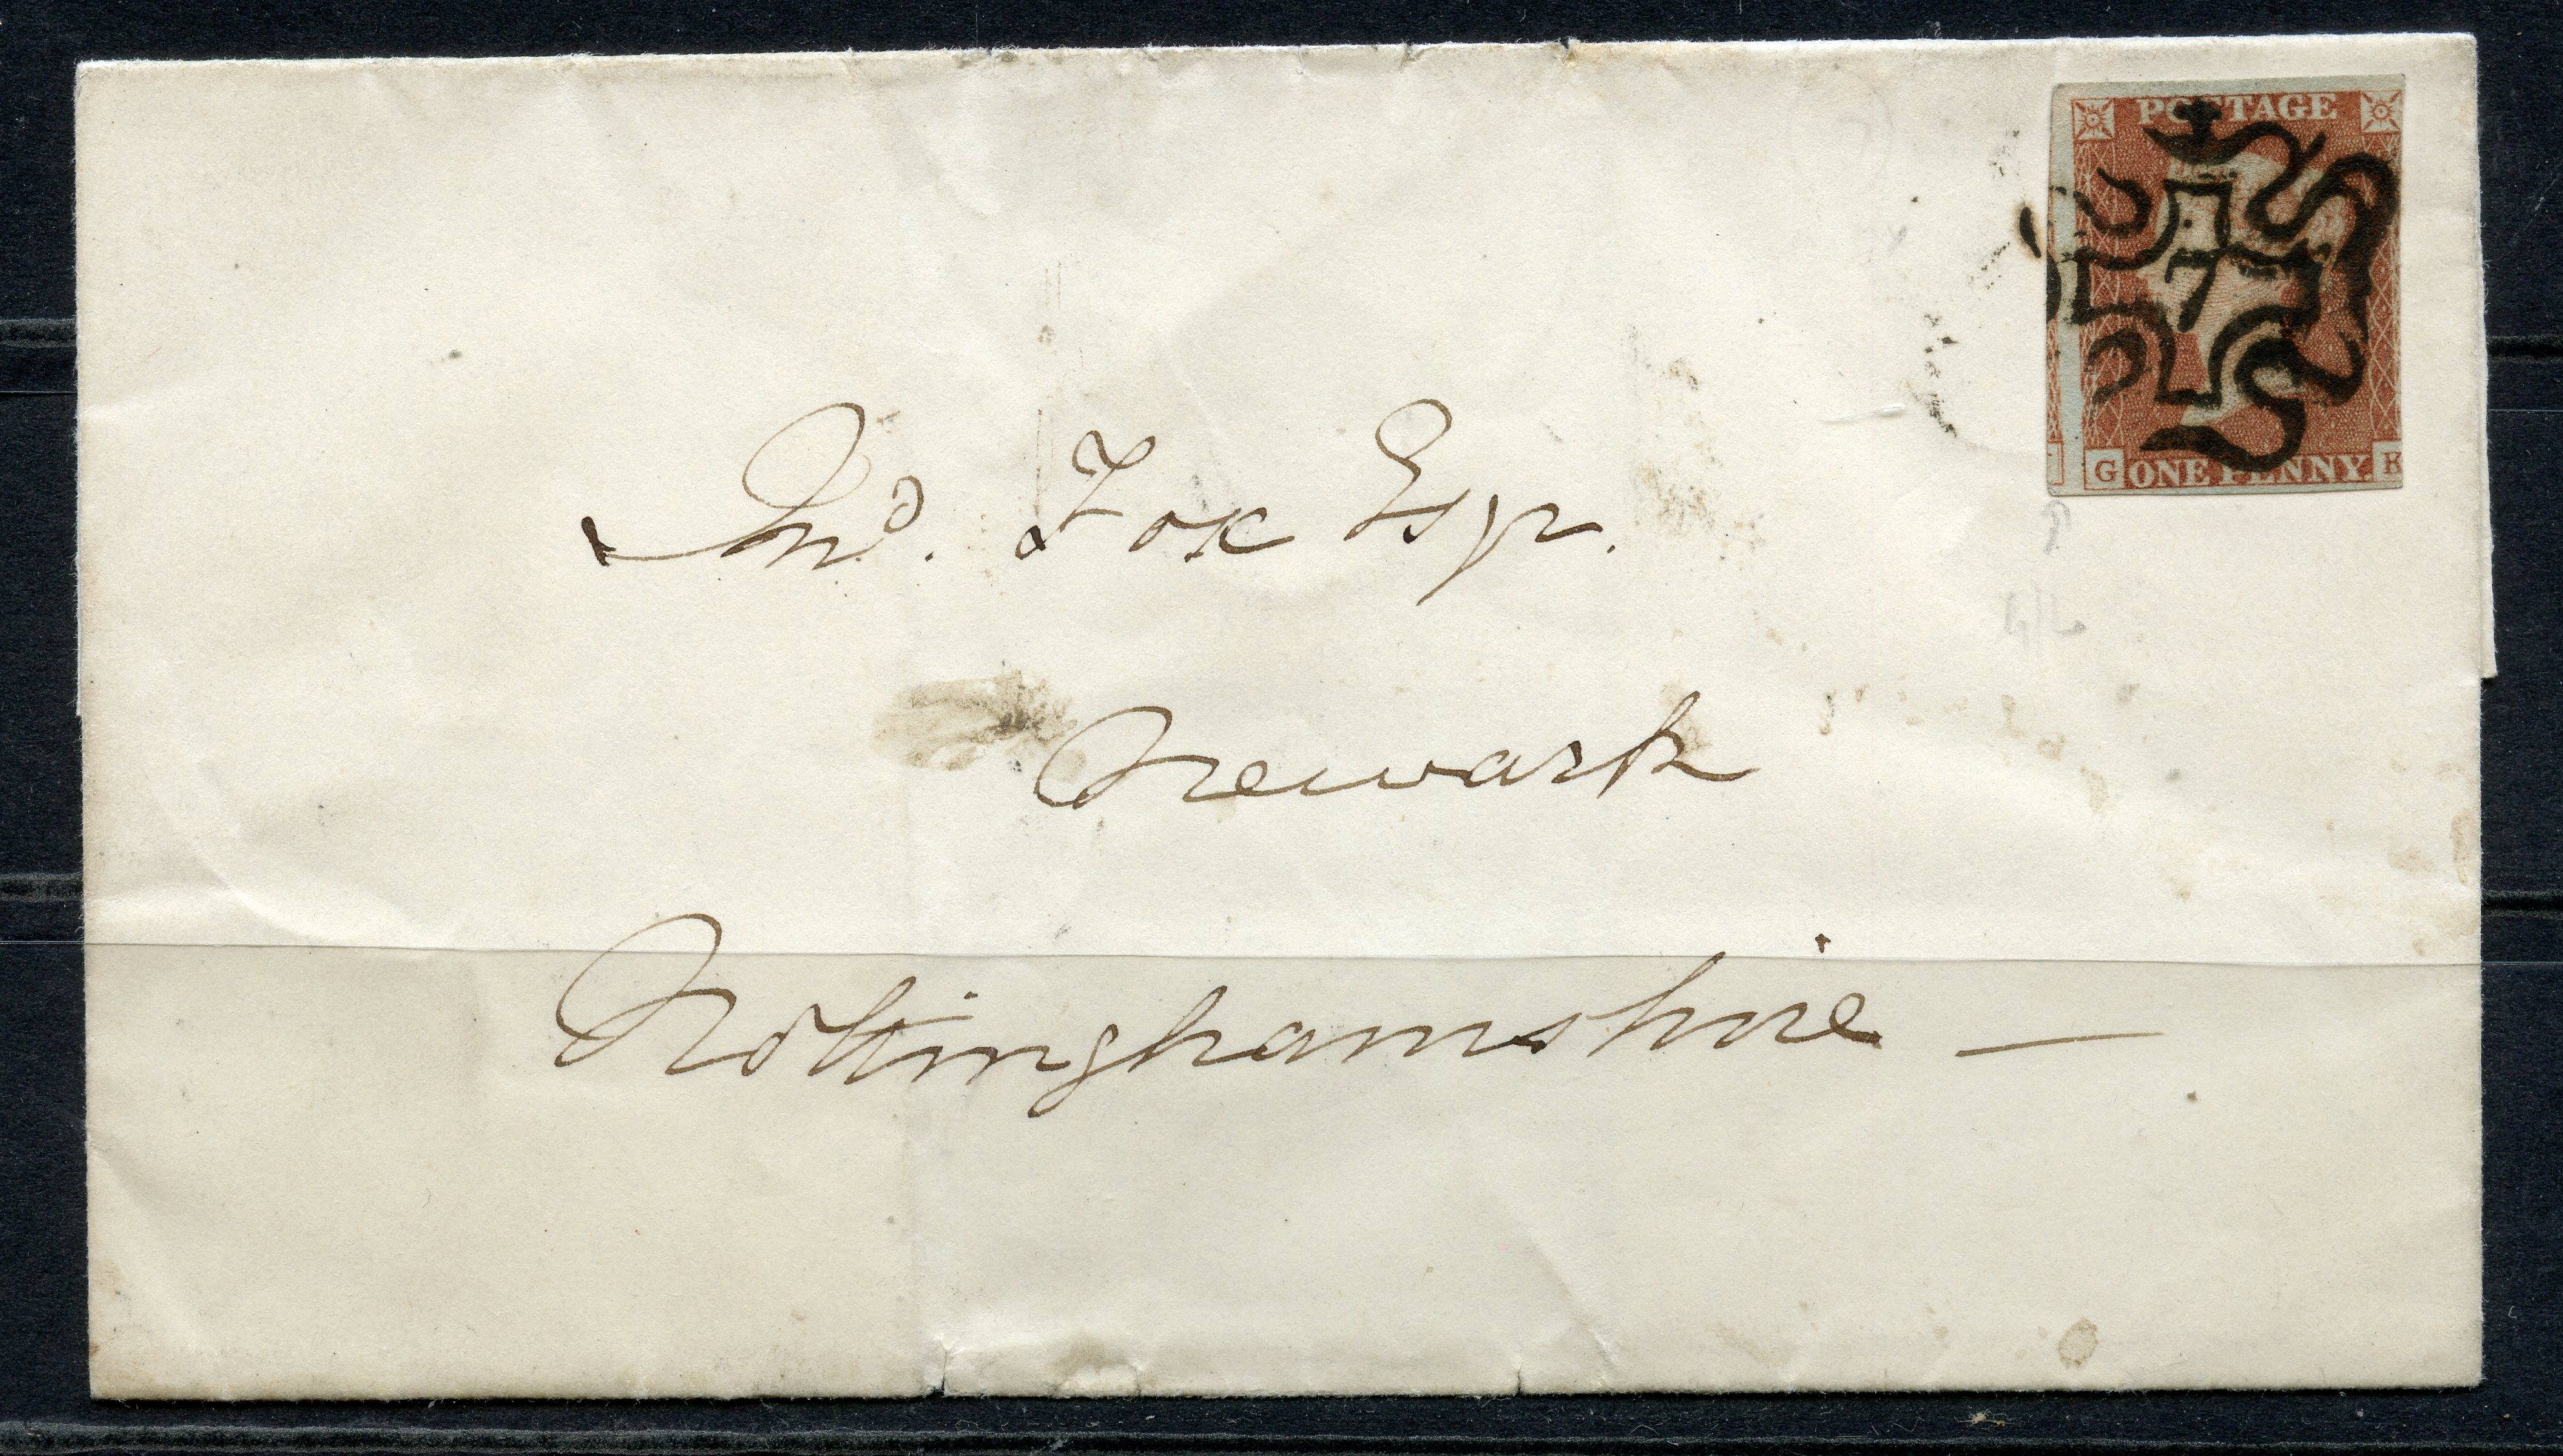 POSTAL HISTORY 1843 London to Newark wrapper franked with 1d red imperf 3 margined tied with black